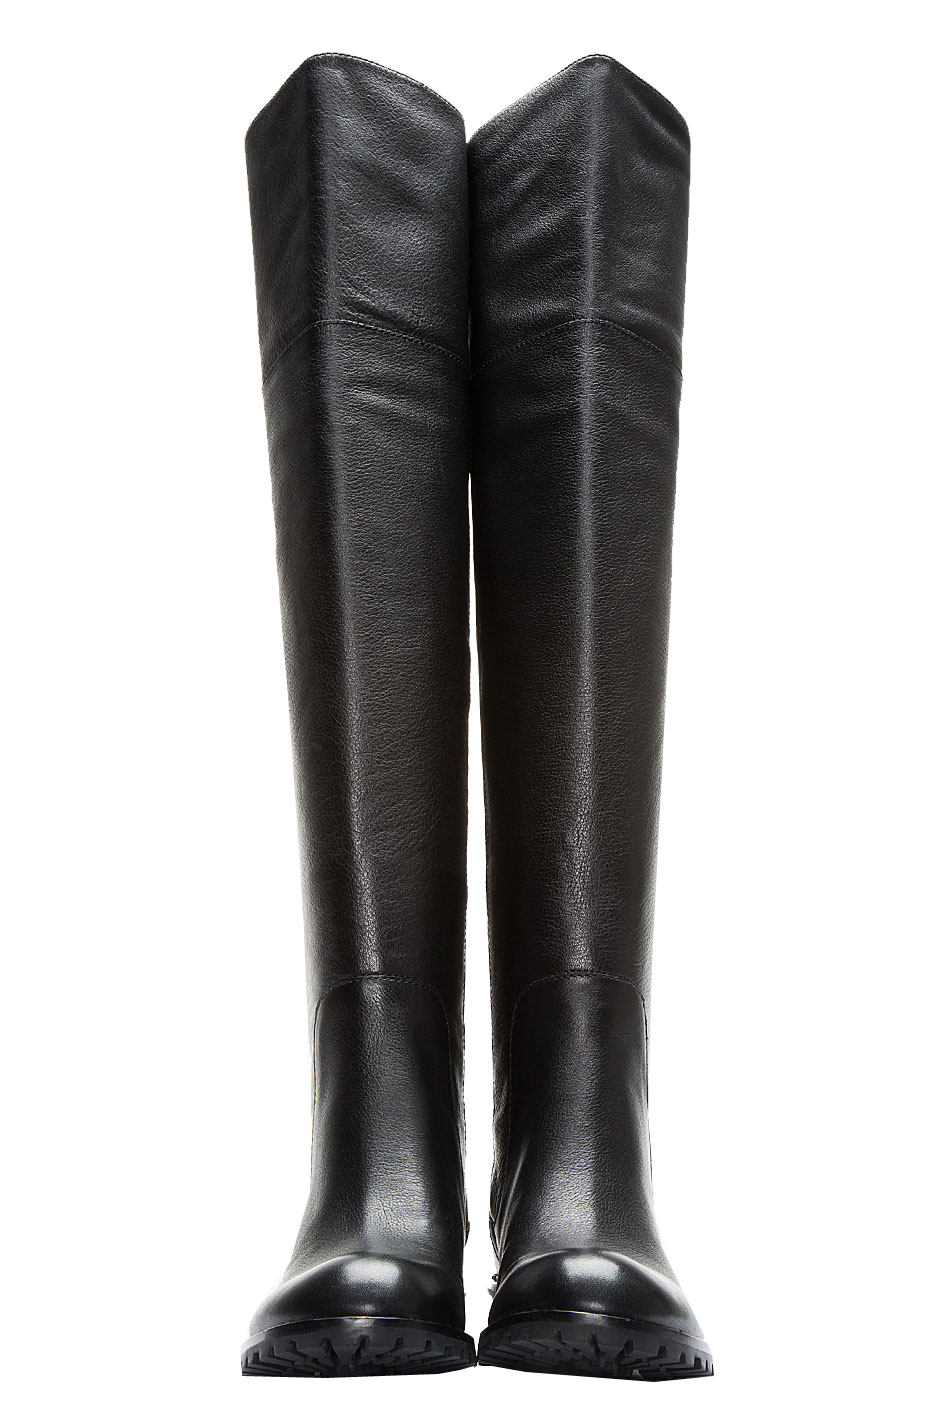 Marc by Marc Jacobs Black Leather Over The Knee Boots